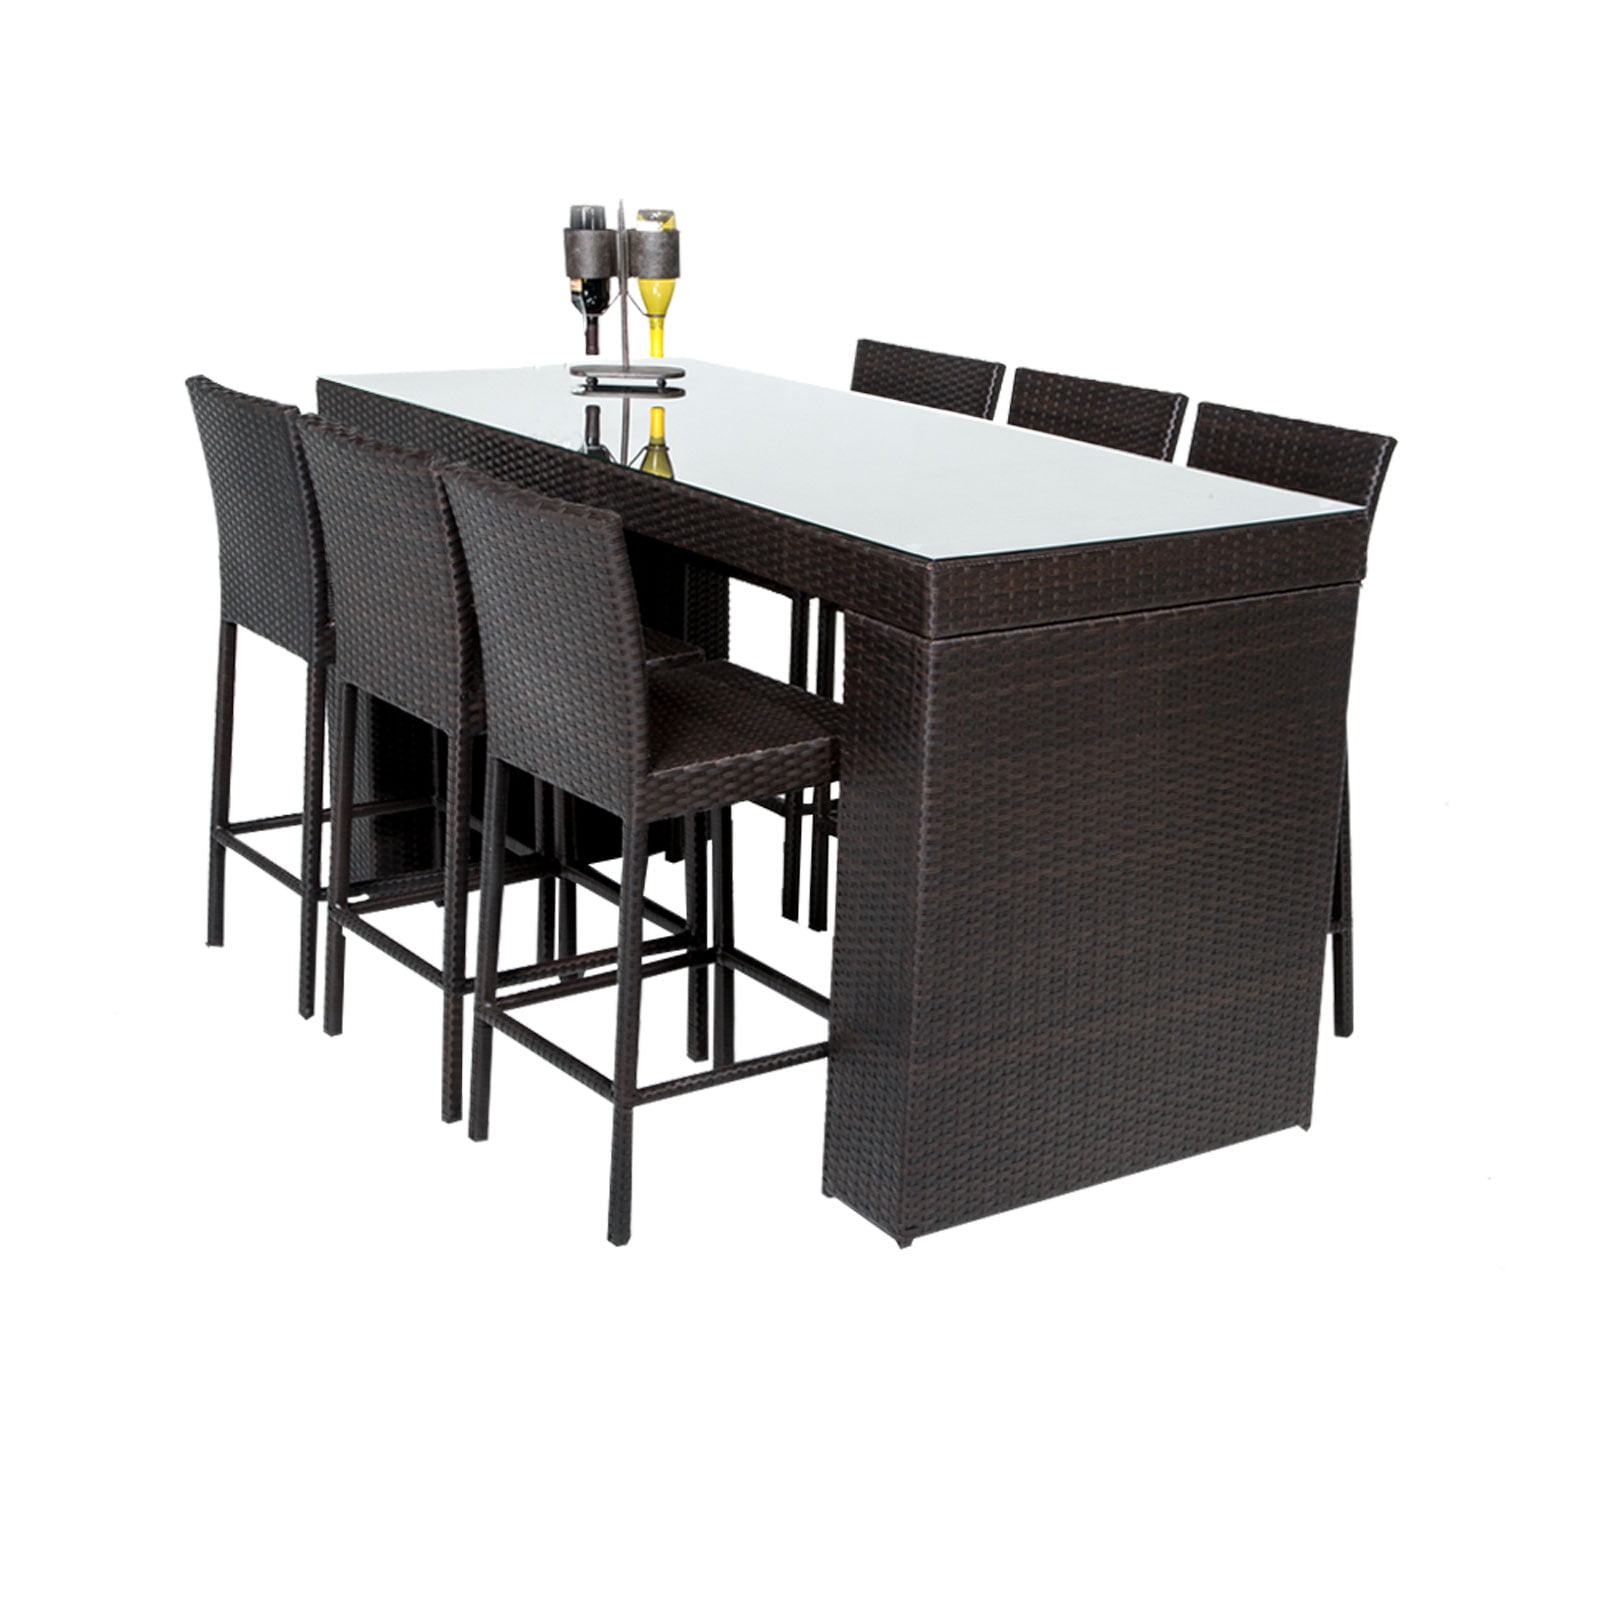 bar table set with barstools 7 piece outdoor wicker patio furniture